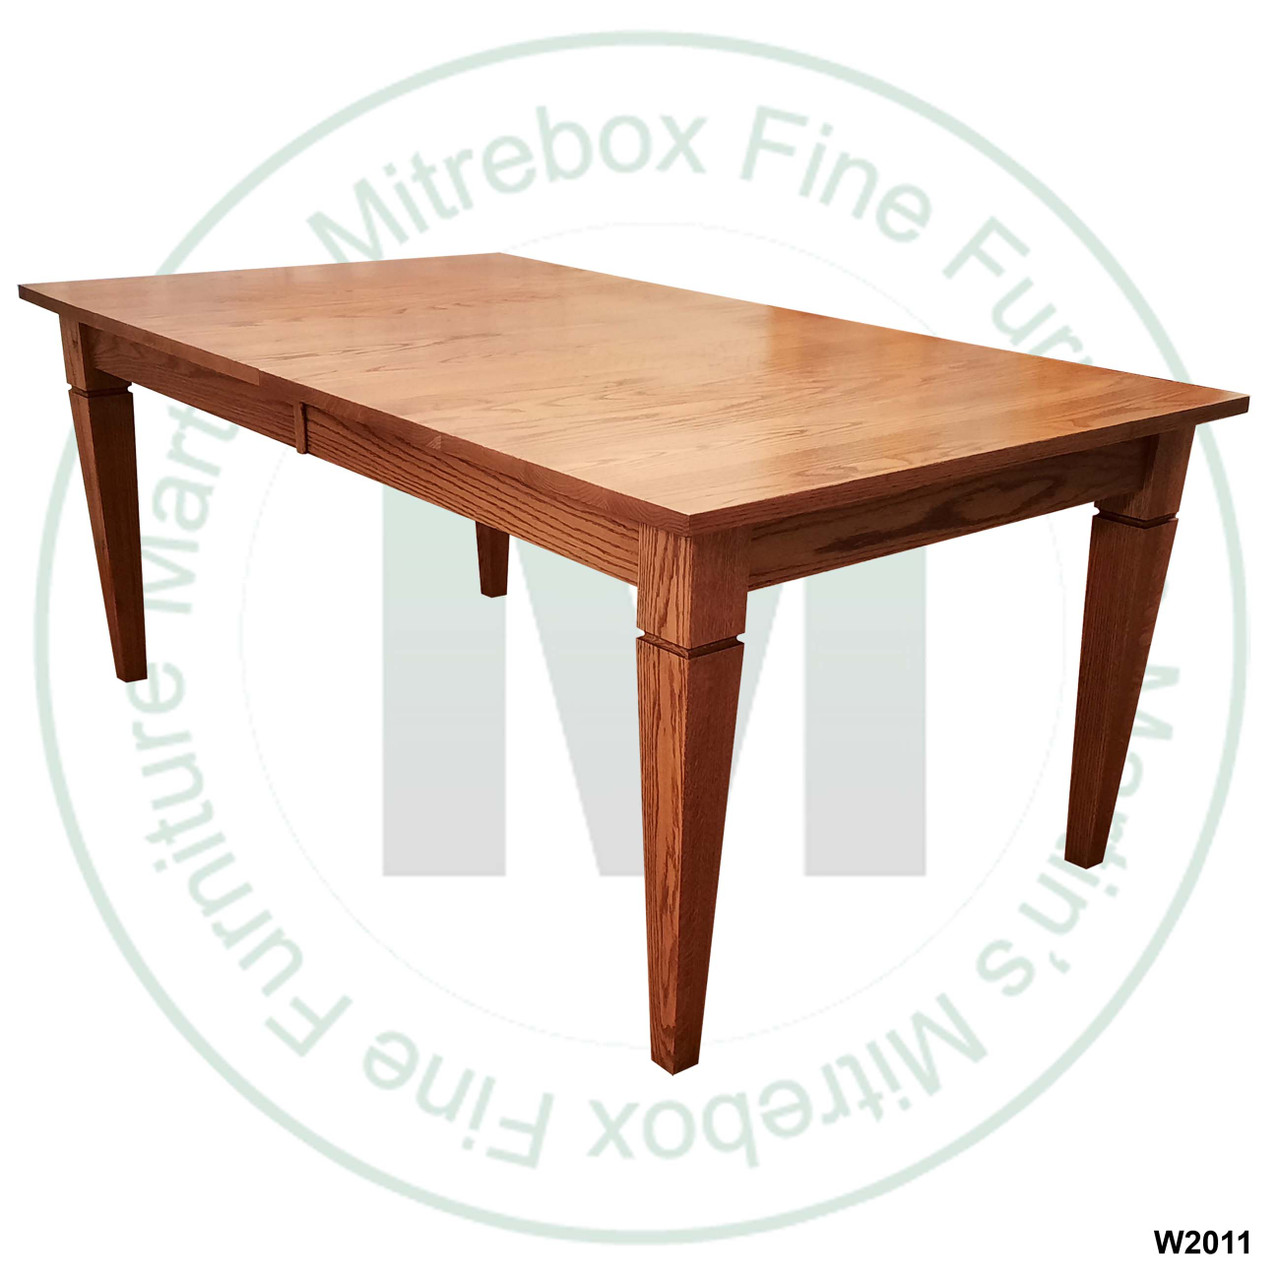 Oak Reesor Solid Top Harvest Table 48''D x 84''W x 30''H Table Has 1'' Thick Top